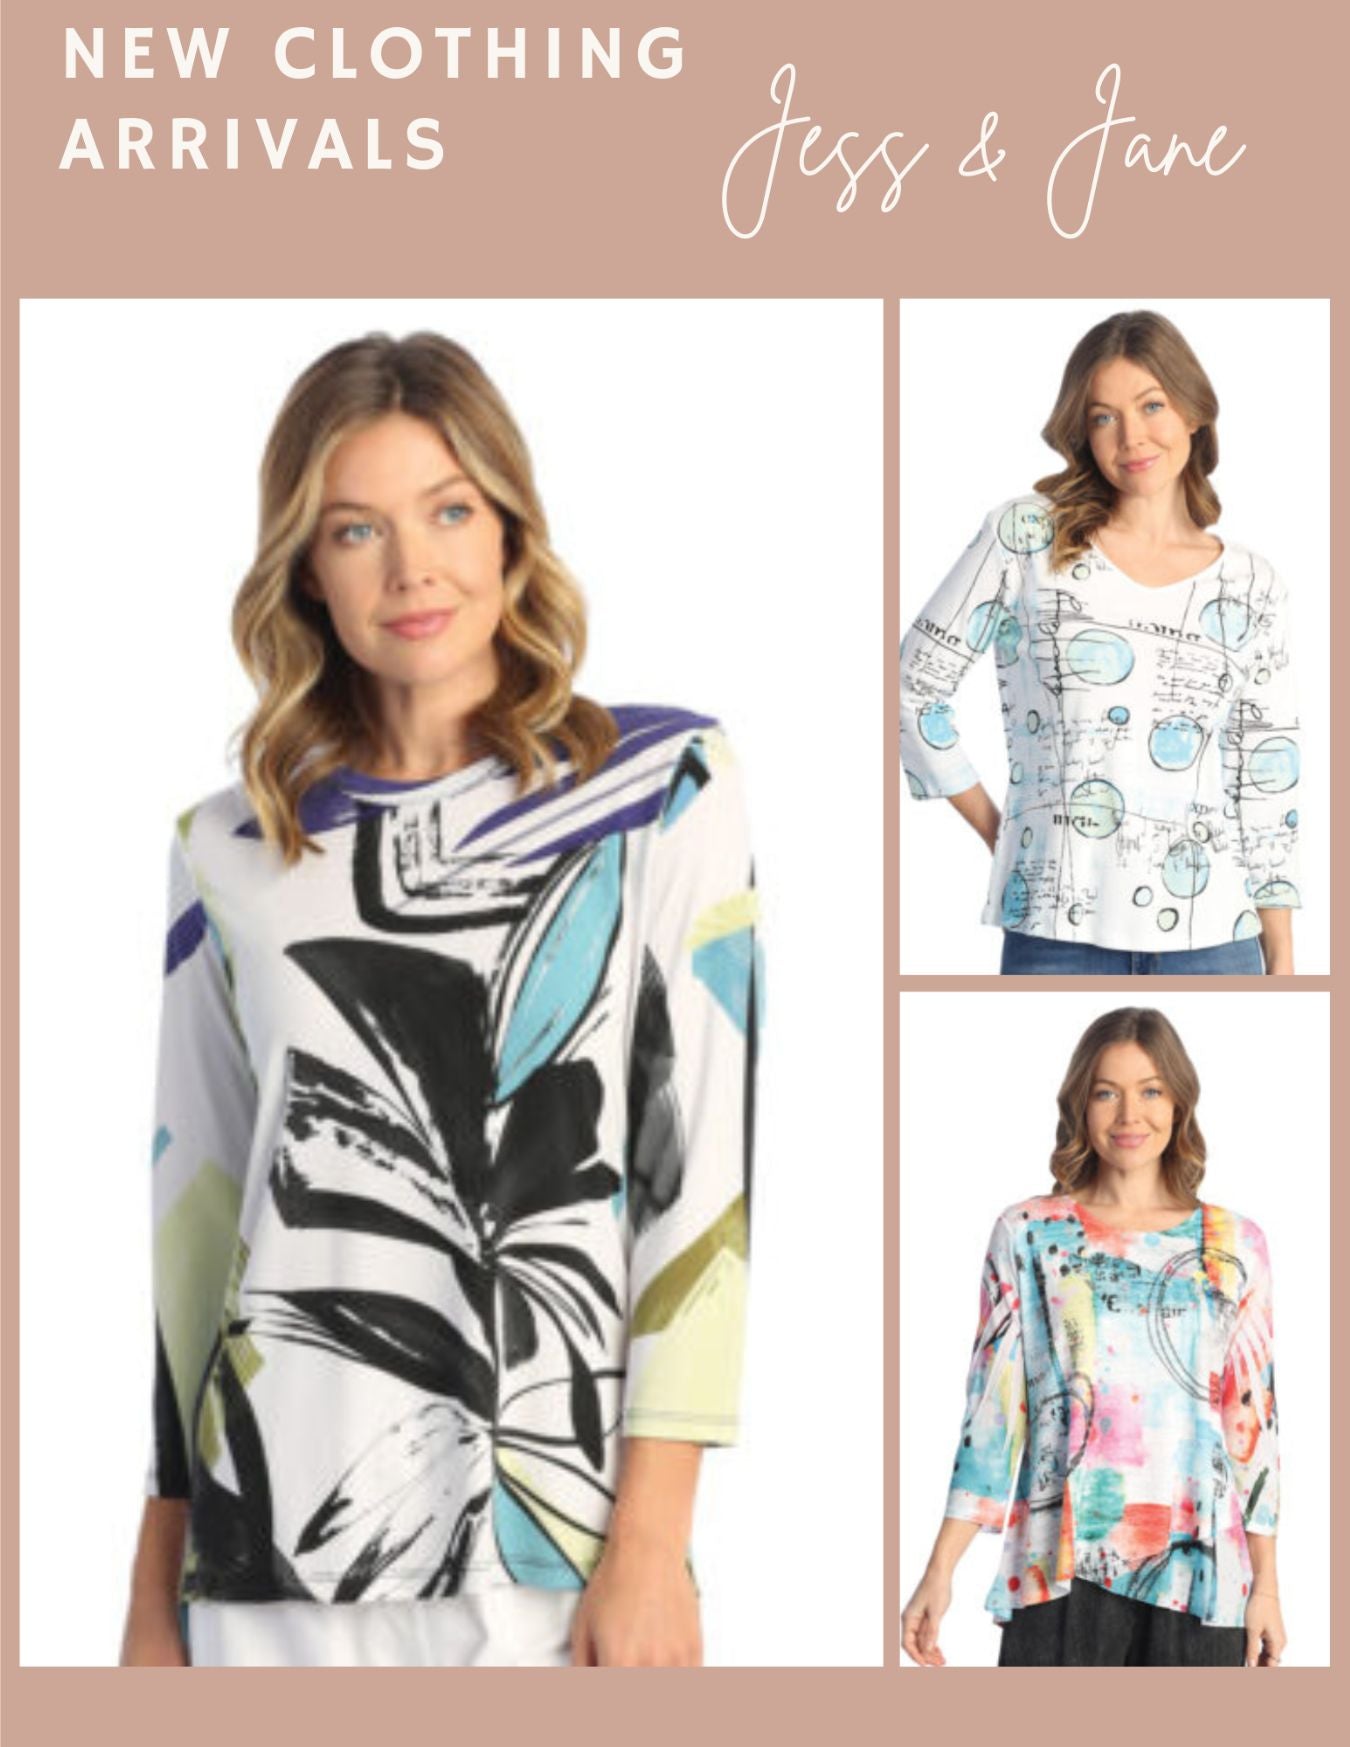 New Jess & Jane clothing arrivals for mothers day gifts